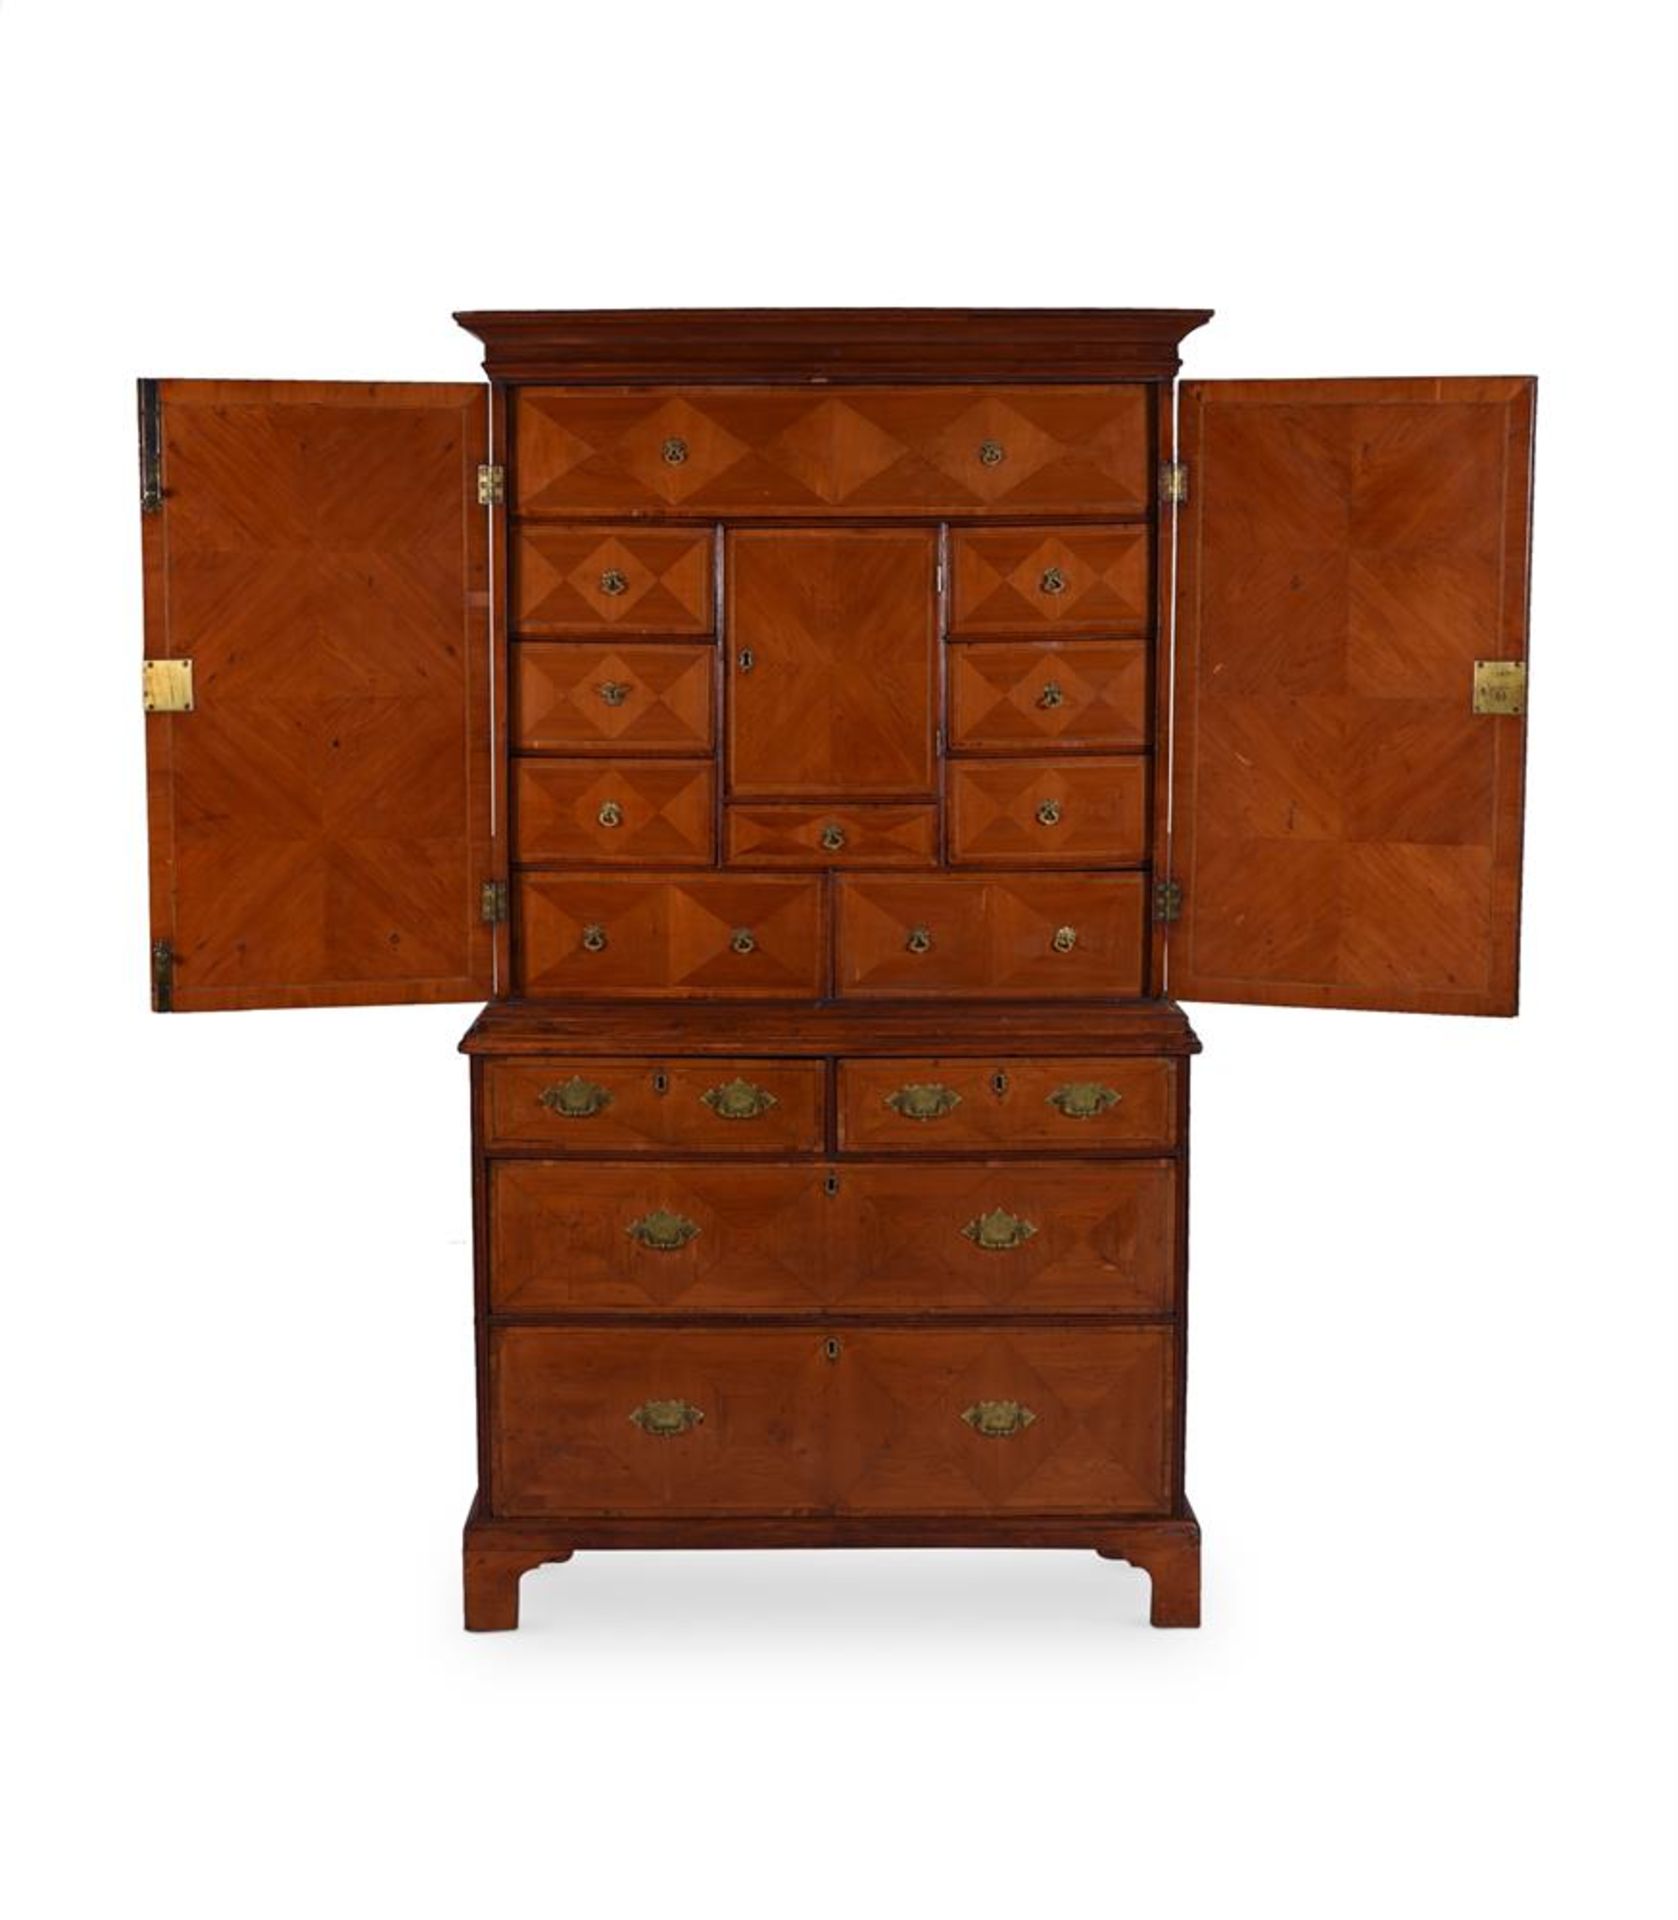 AN UNUSUAL YEW WOOD CABINET ON CHEST, 18TH CENTURY - Image 2 of 7